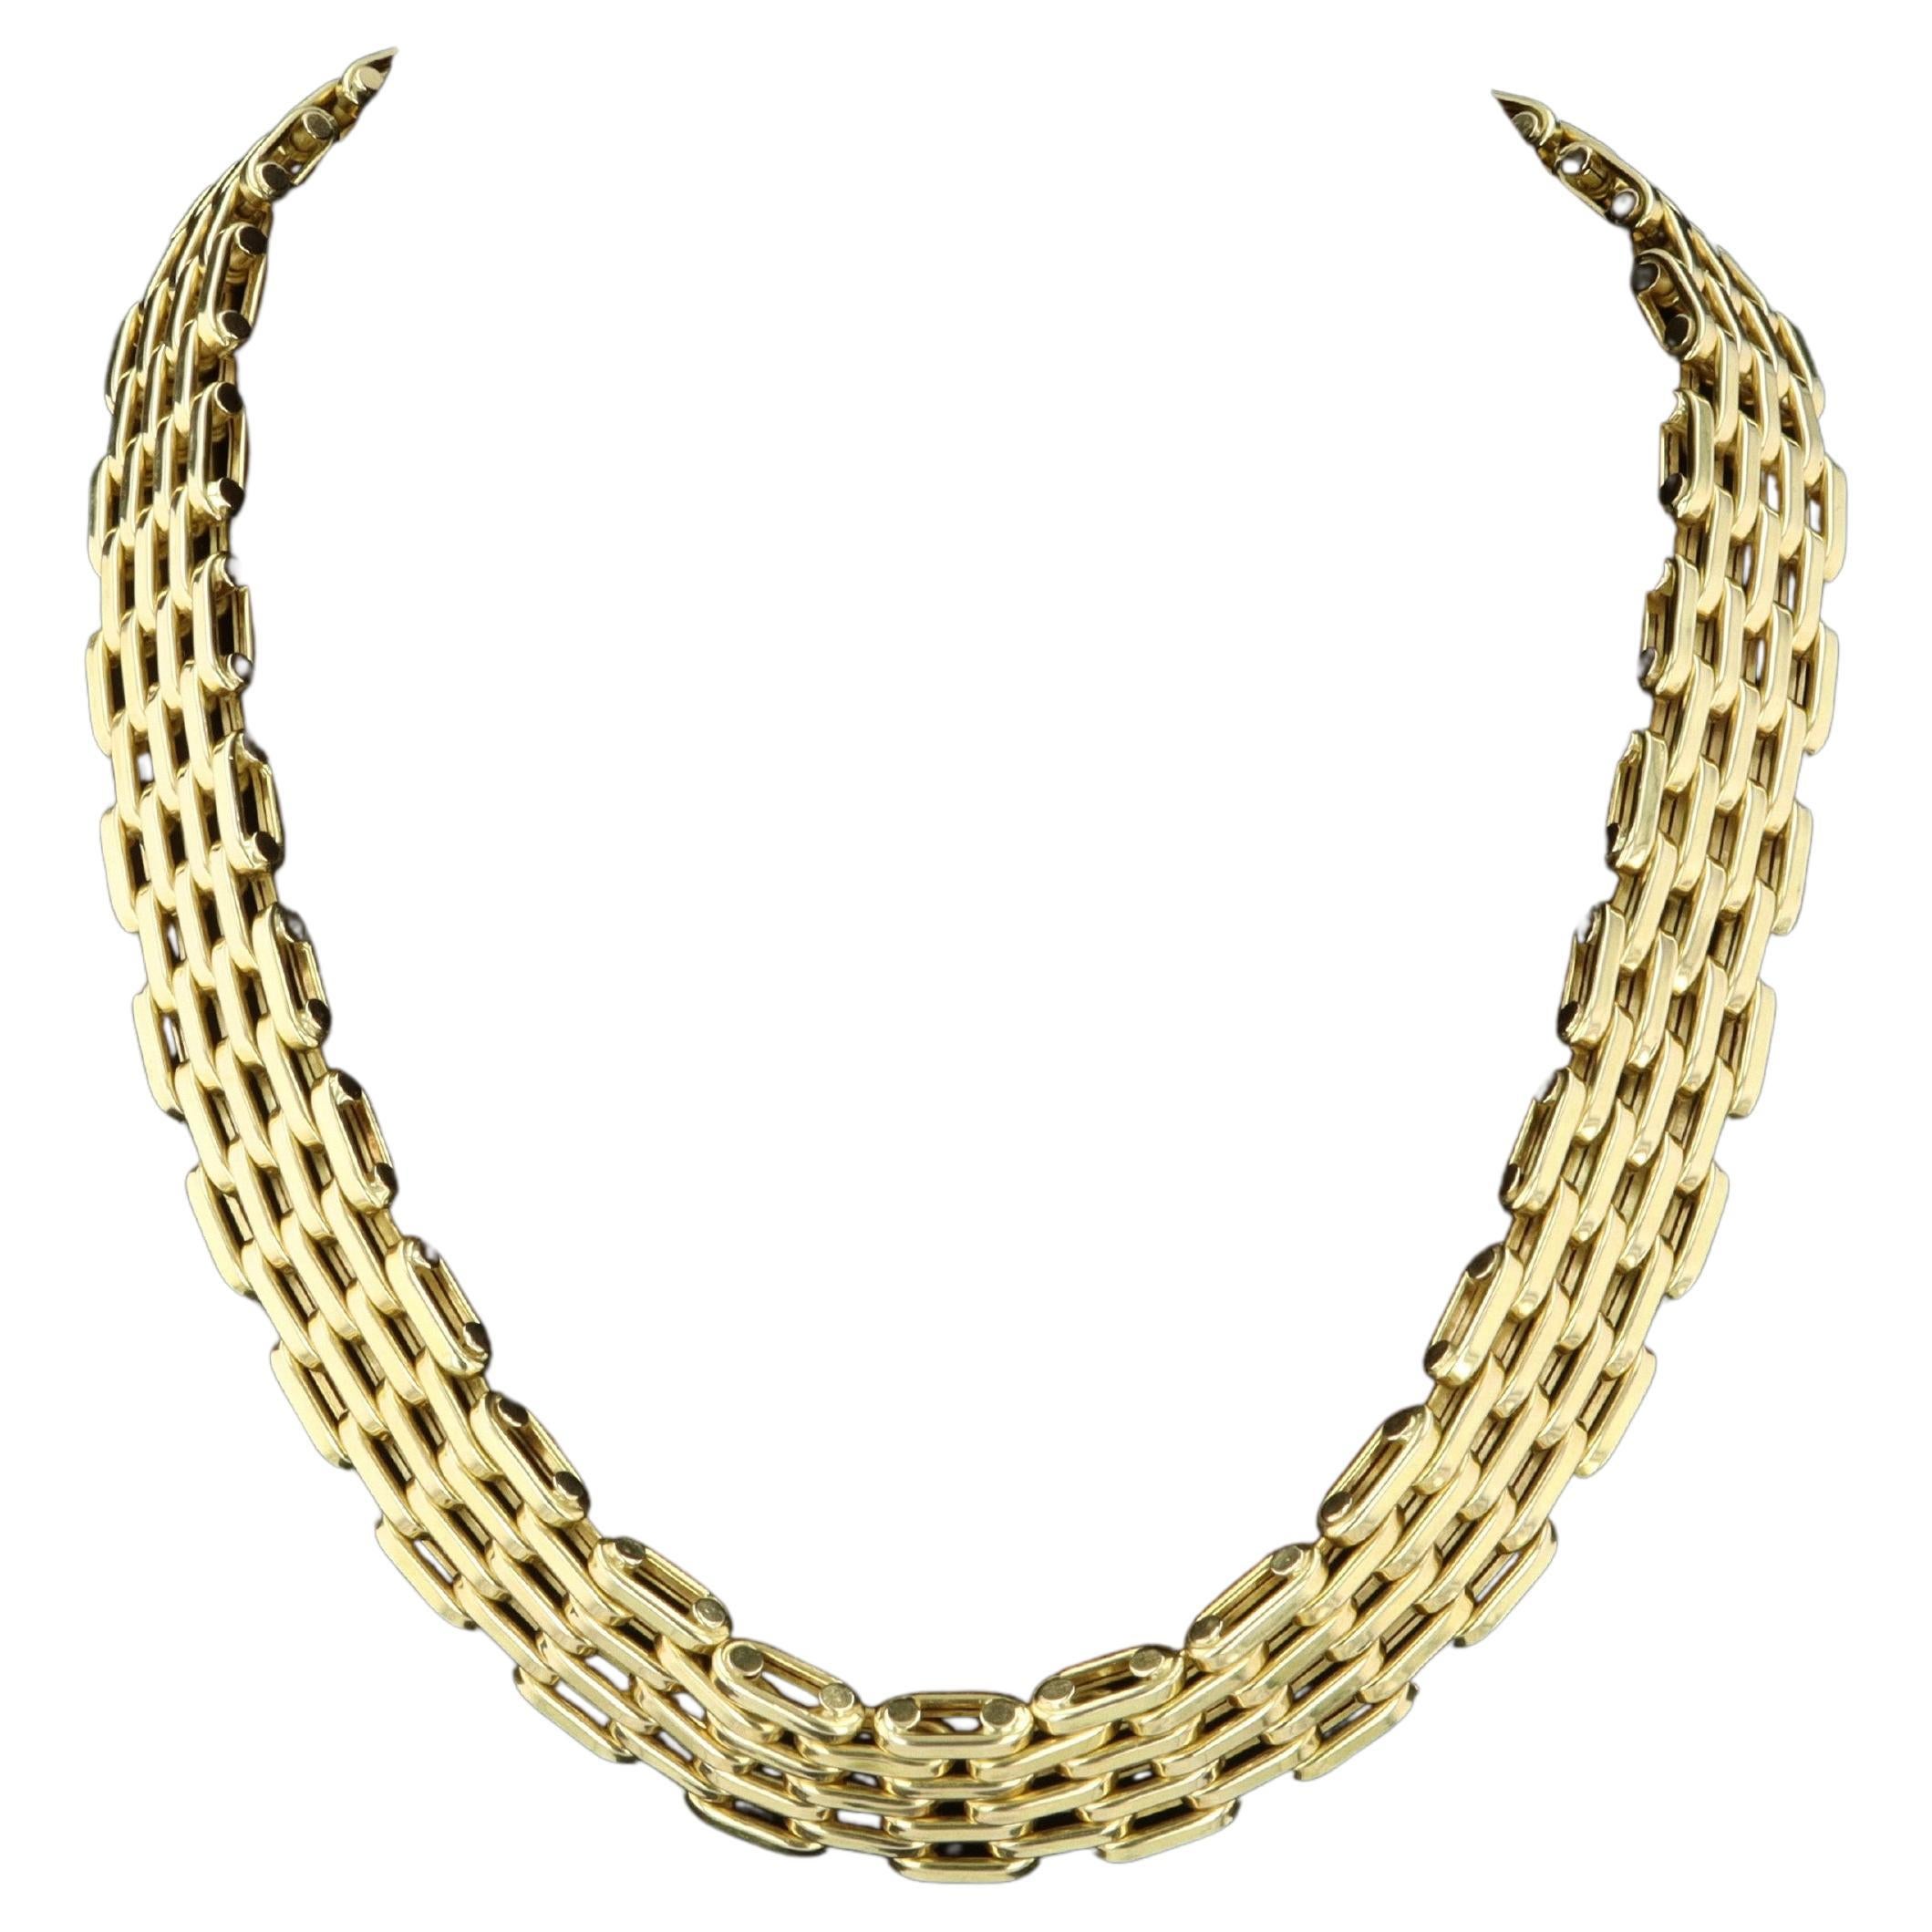 Links of Luxury Woven Gold Estate Necklace For Sale